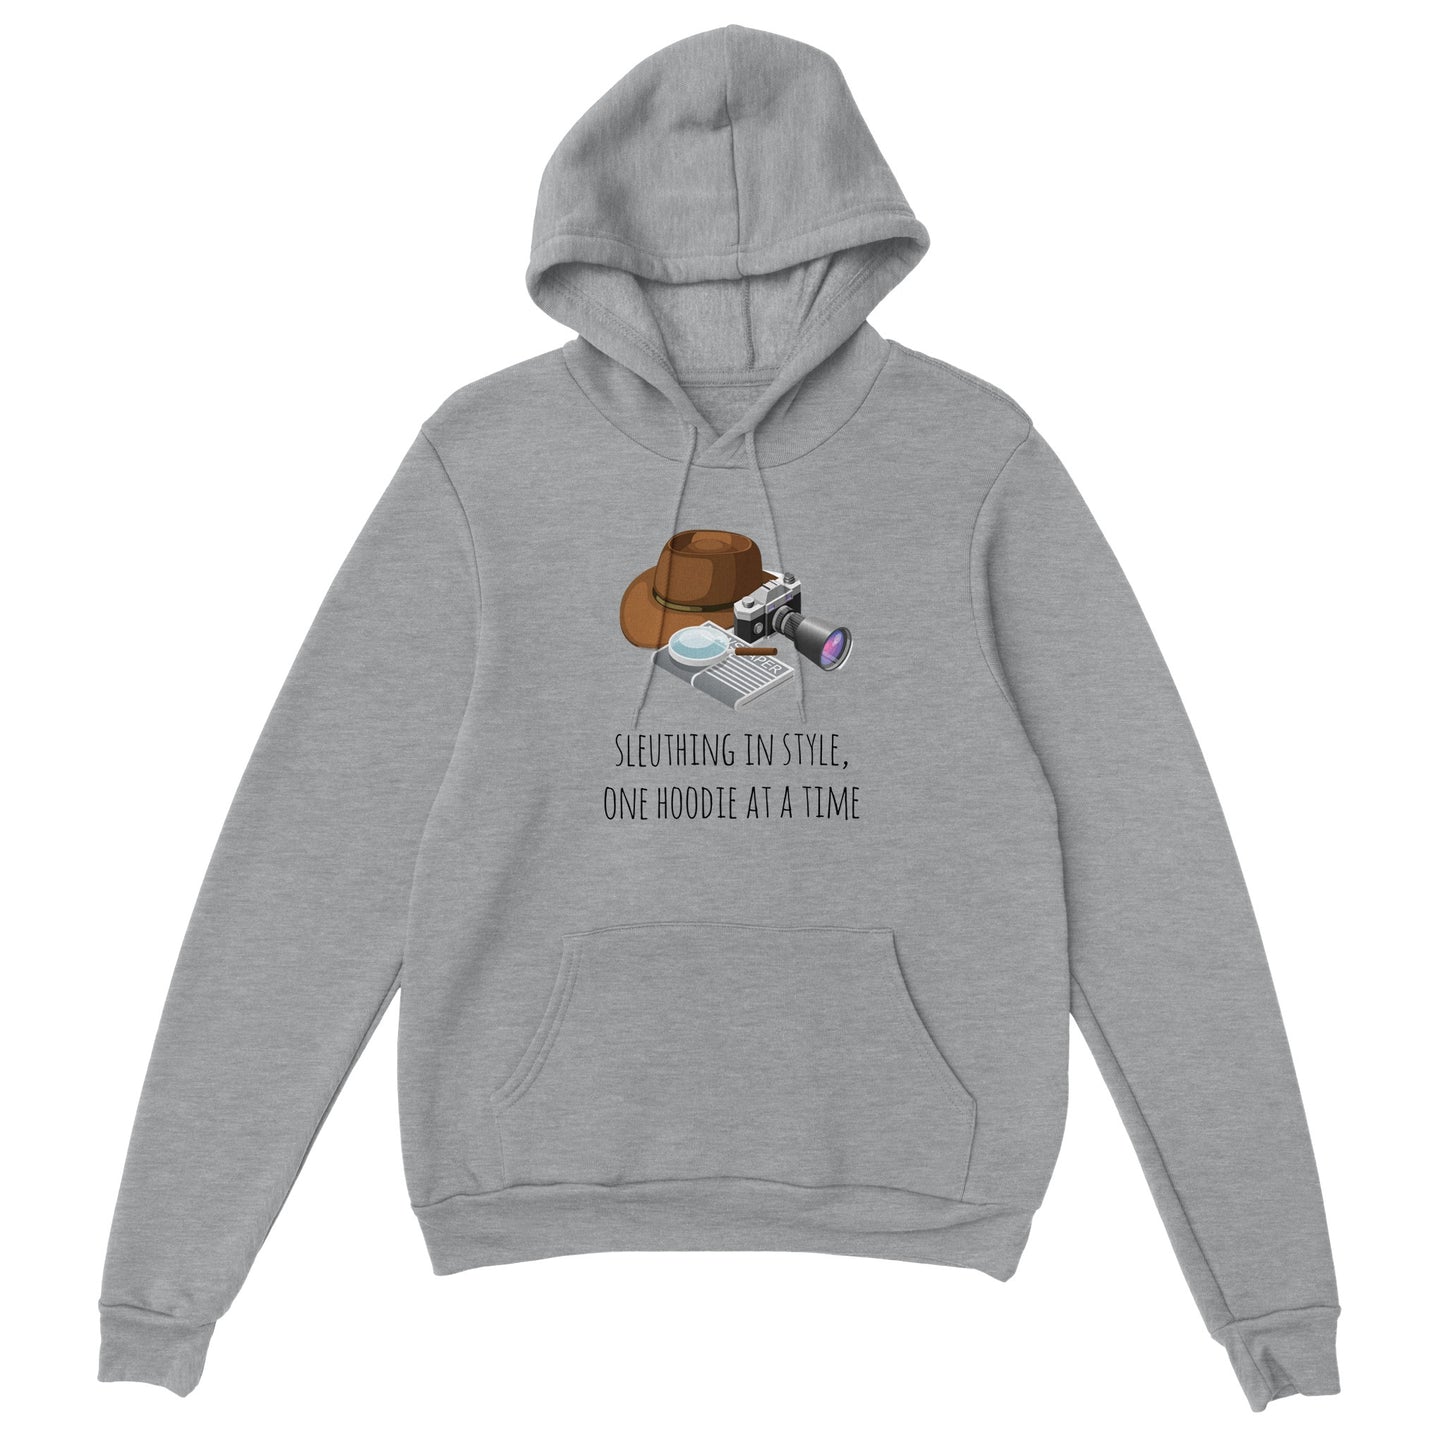 Classic Unisex Pullover Hoodie - Sleuthing In Style, One Hoodie At A Time.